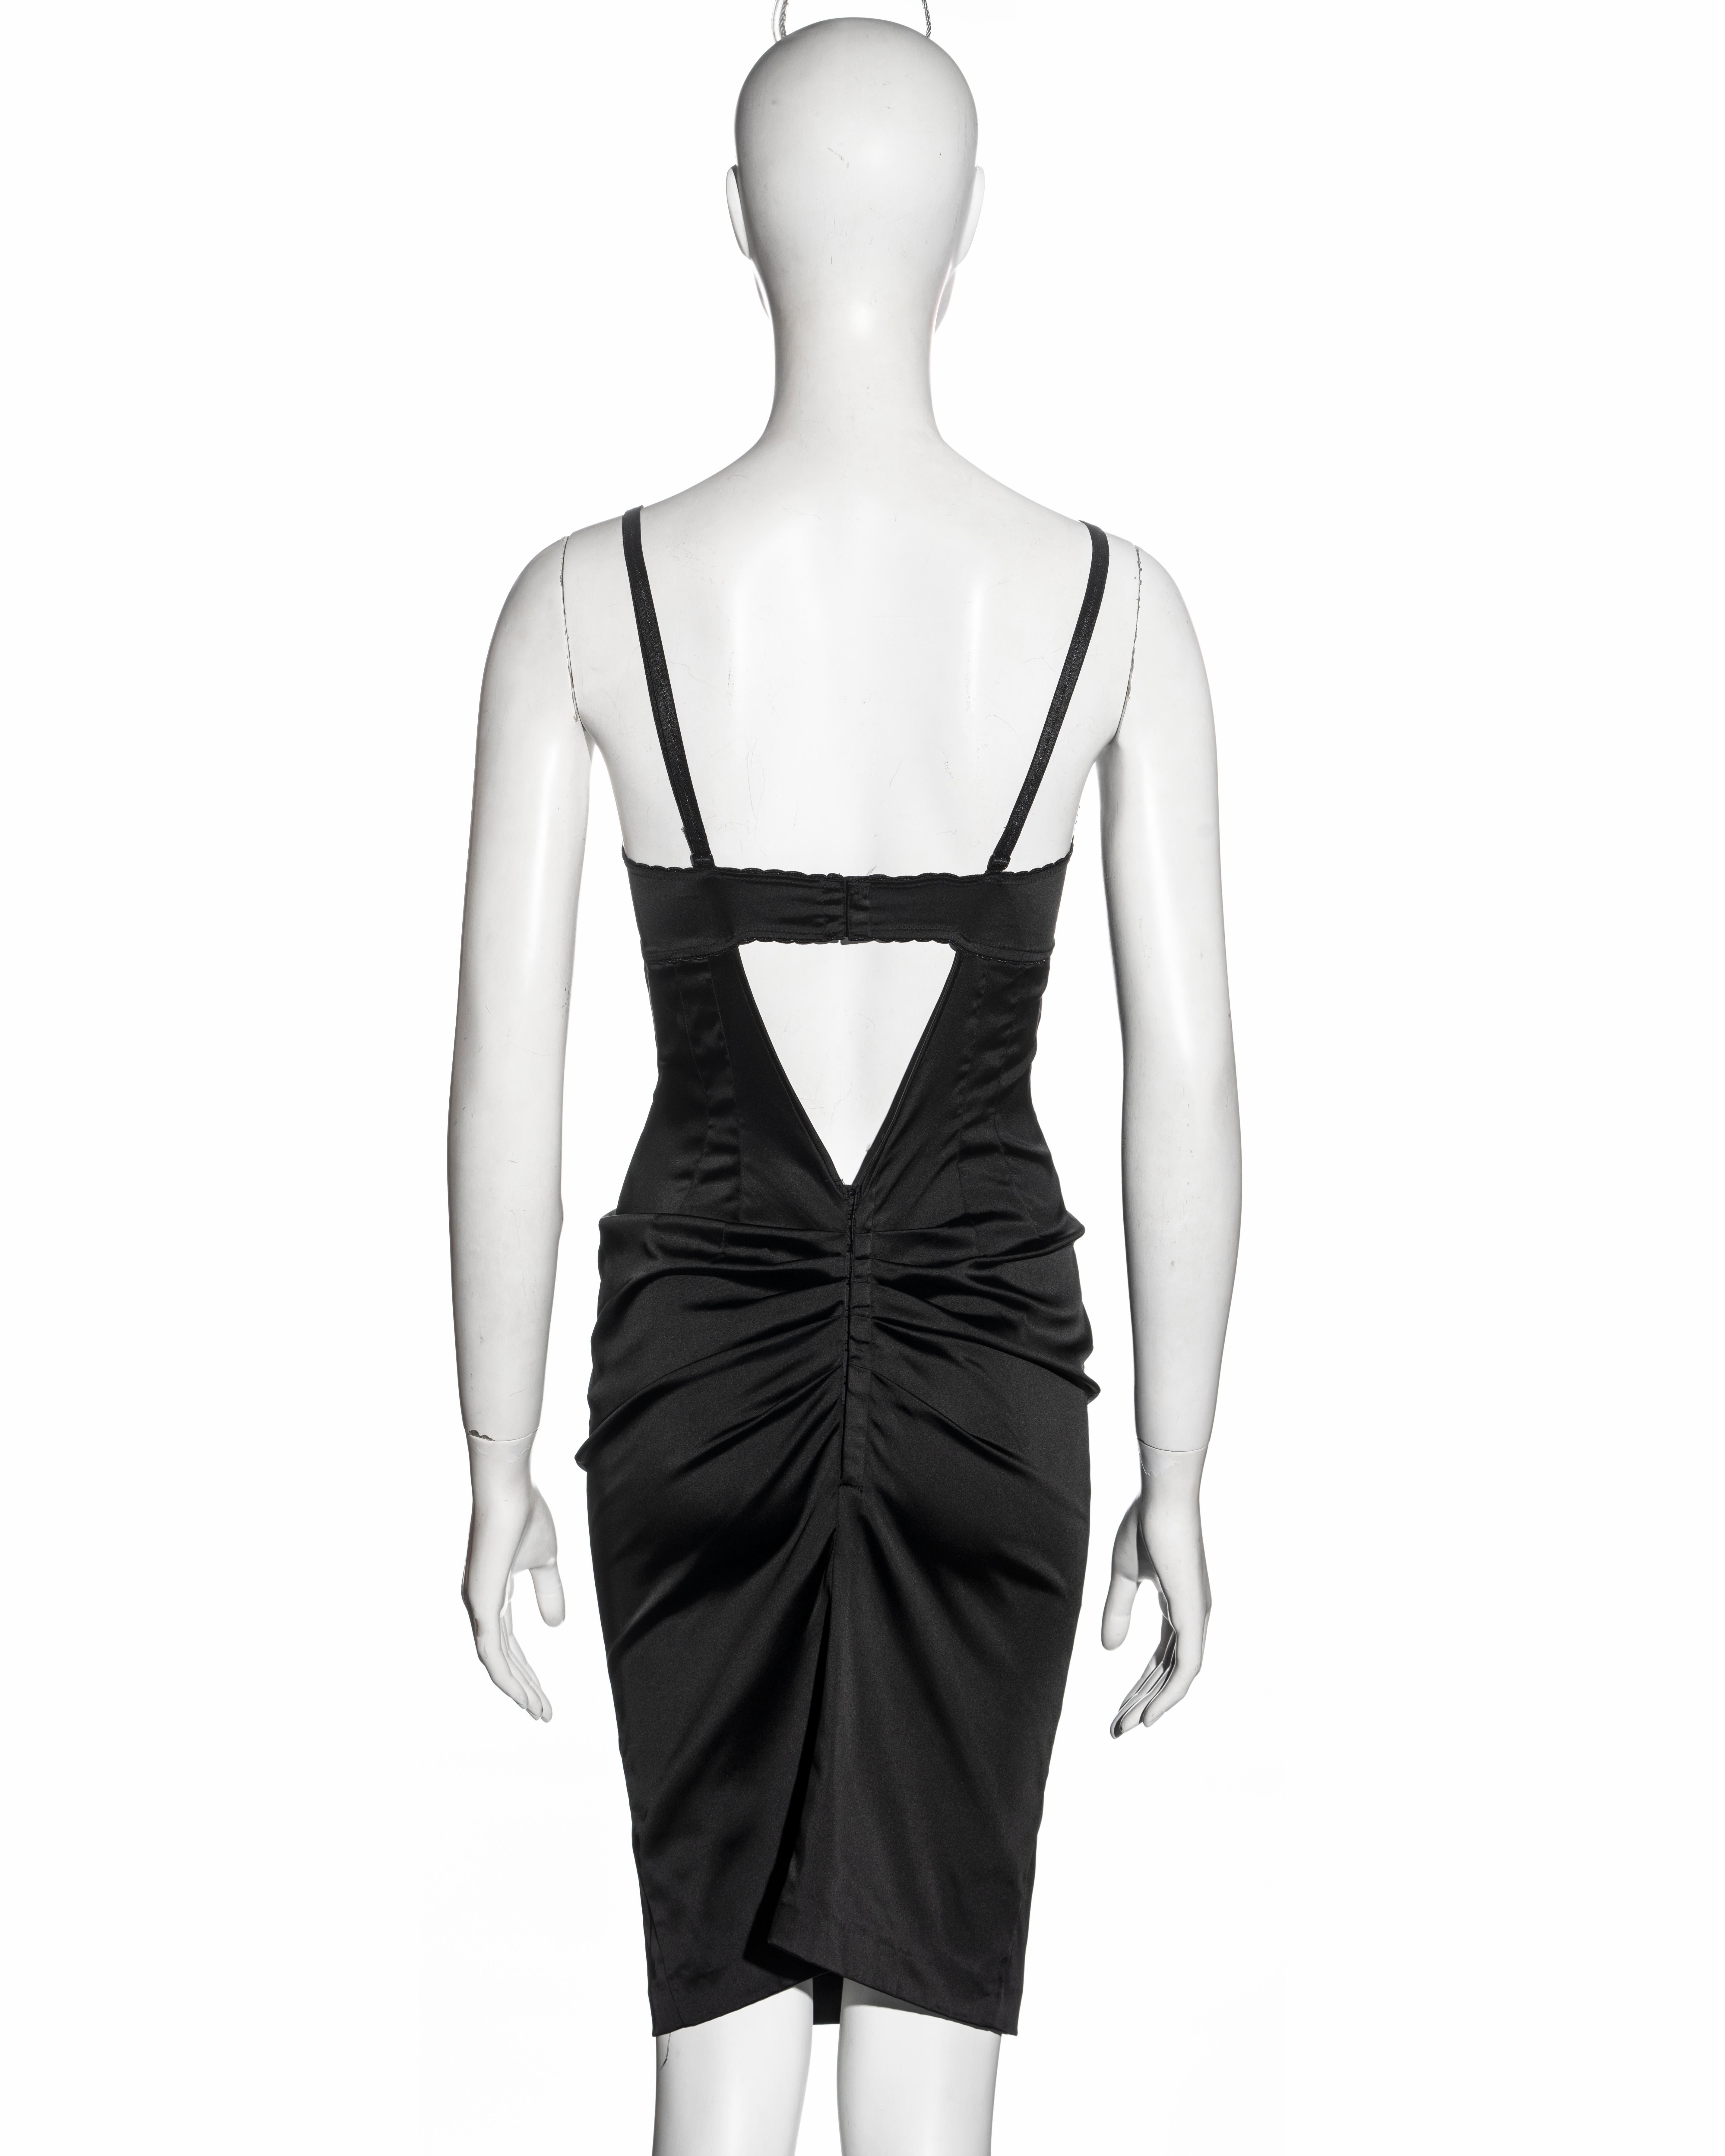 ▪ Dolce & Gabbana black evening dress
▪ Stretch satin 
▪ Attached bra with adjustable shoulder straps 
▪ Low back 
▪ Ruched center-back seam with corset style hooks at the opening 
▪ IT 42 - FR 38 - UK 10 - US 6
▪ Fall-Winter 1998
▪ 80% Acetate, 13%